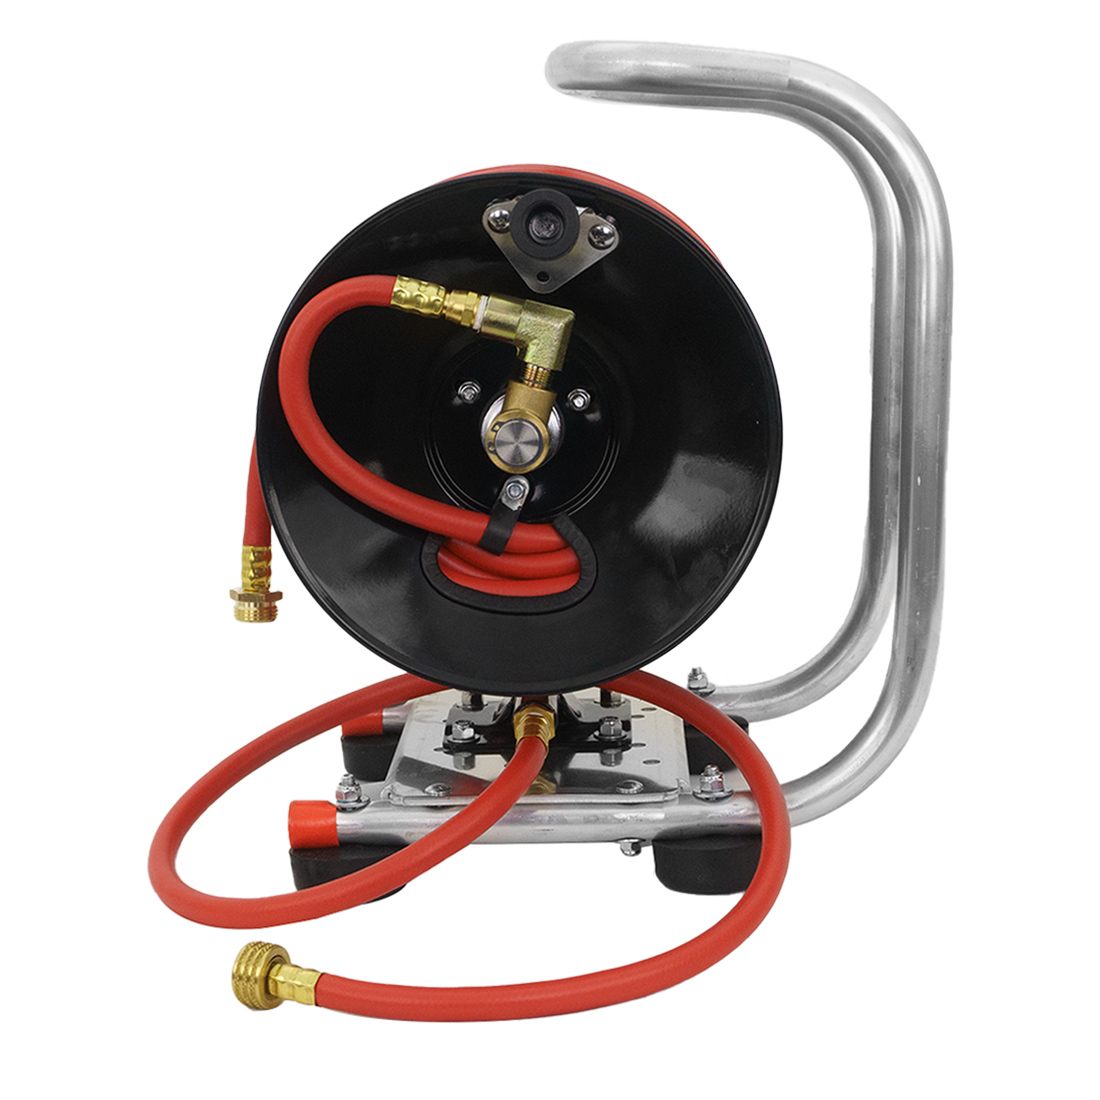 Pure Water Power Portable Hose Reel Assembly, Accessories